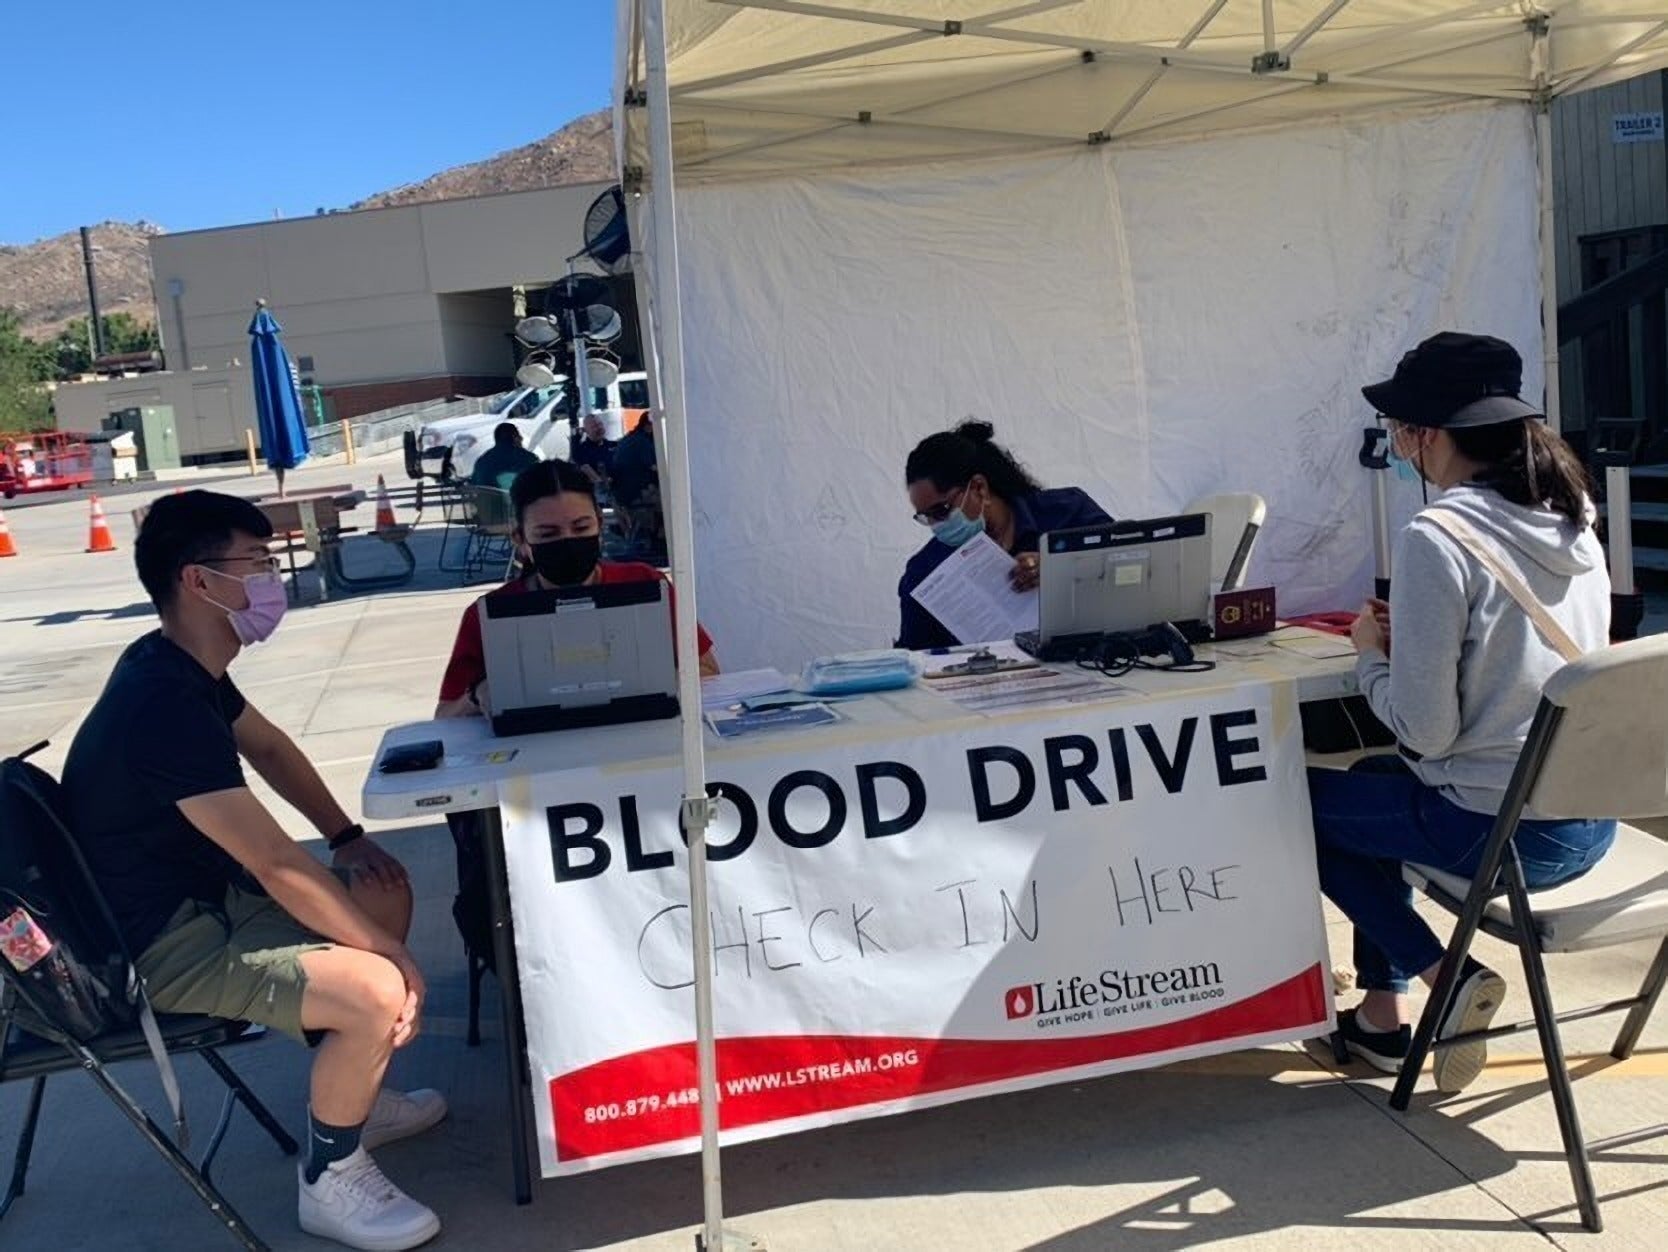 Blood Drive - Check In 1